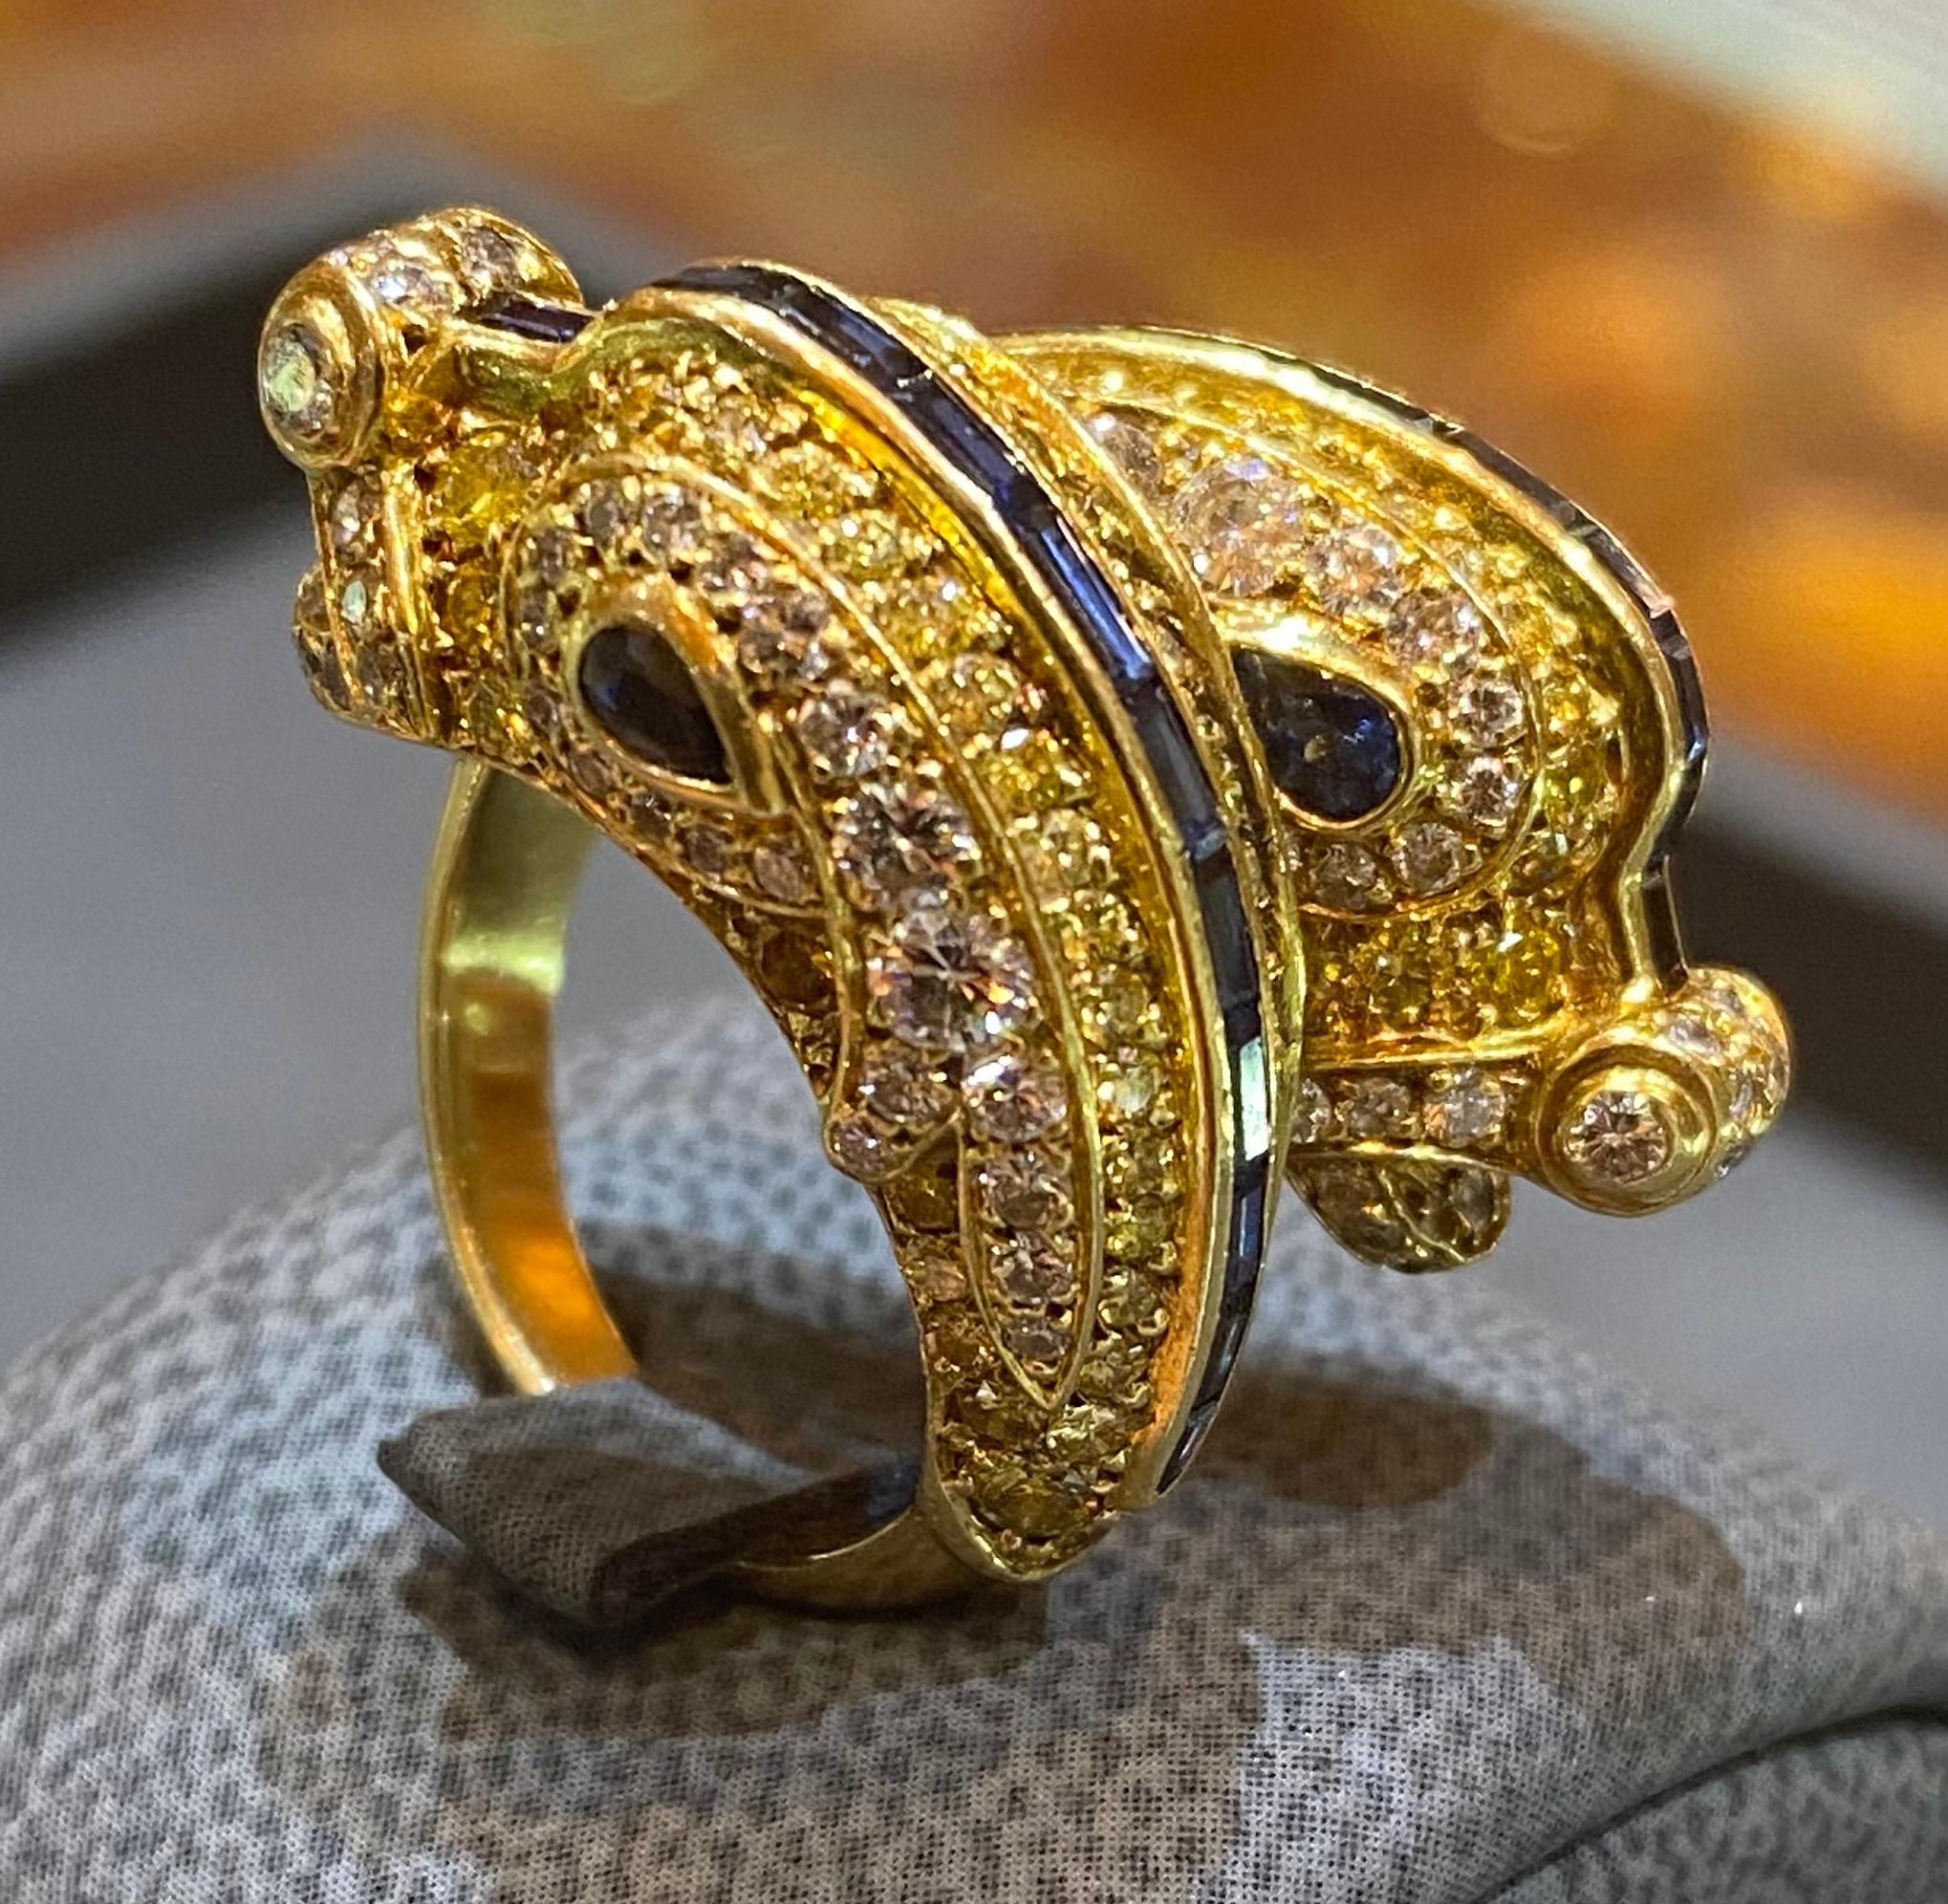 Extremely Rare and Iconic Fancy Yellow Diamond Chimeres Ring by Cartier 6